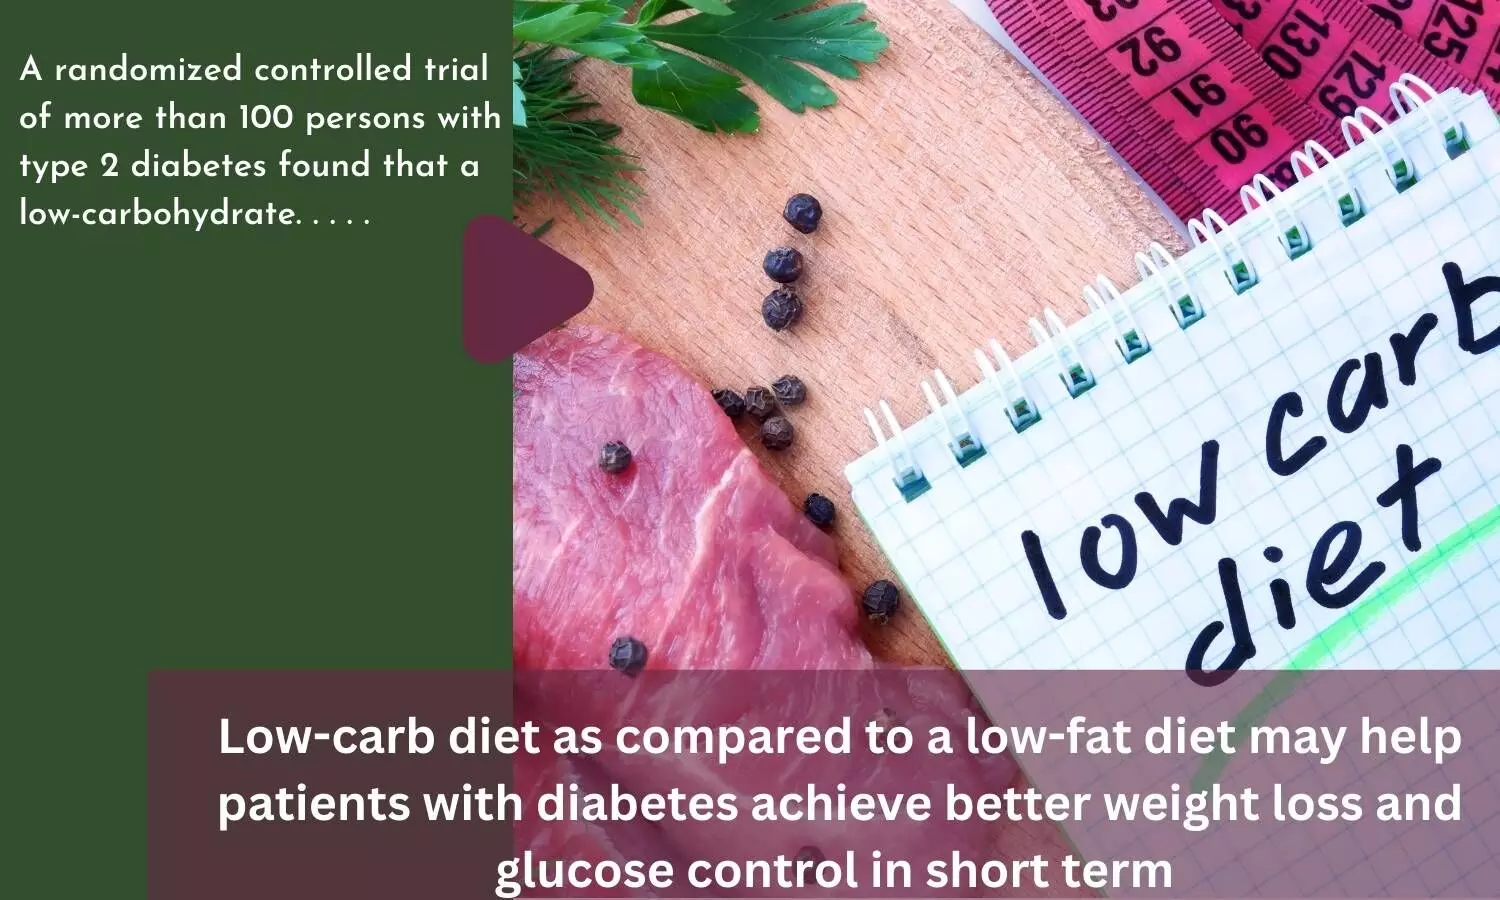 Low-carb diet as compared to a low-fat diet may help patients with diabetes achieve better weight loss and glucose control in short term